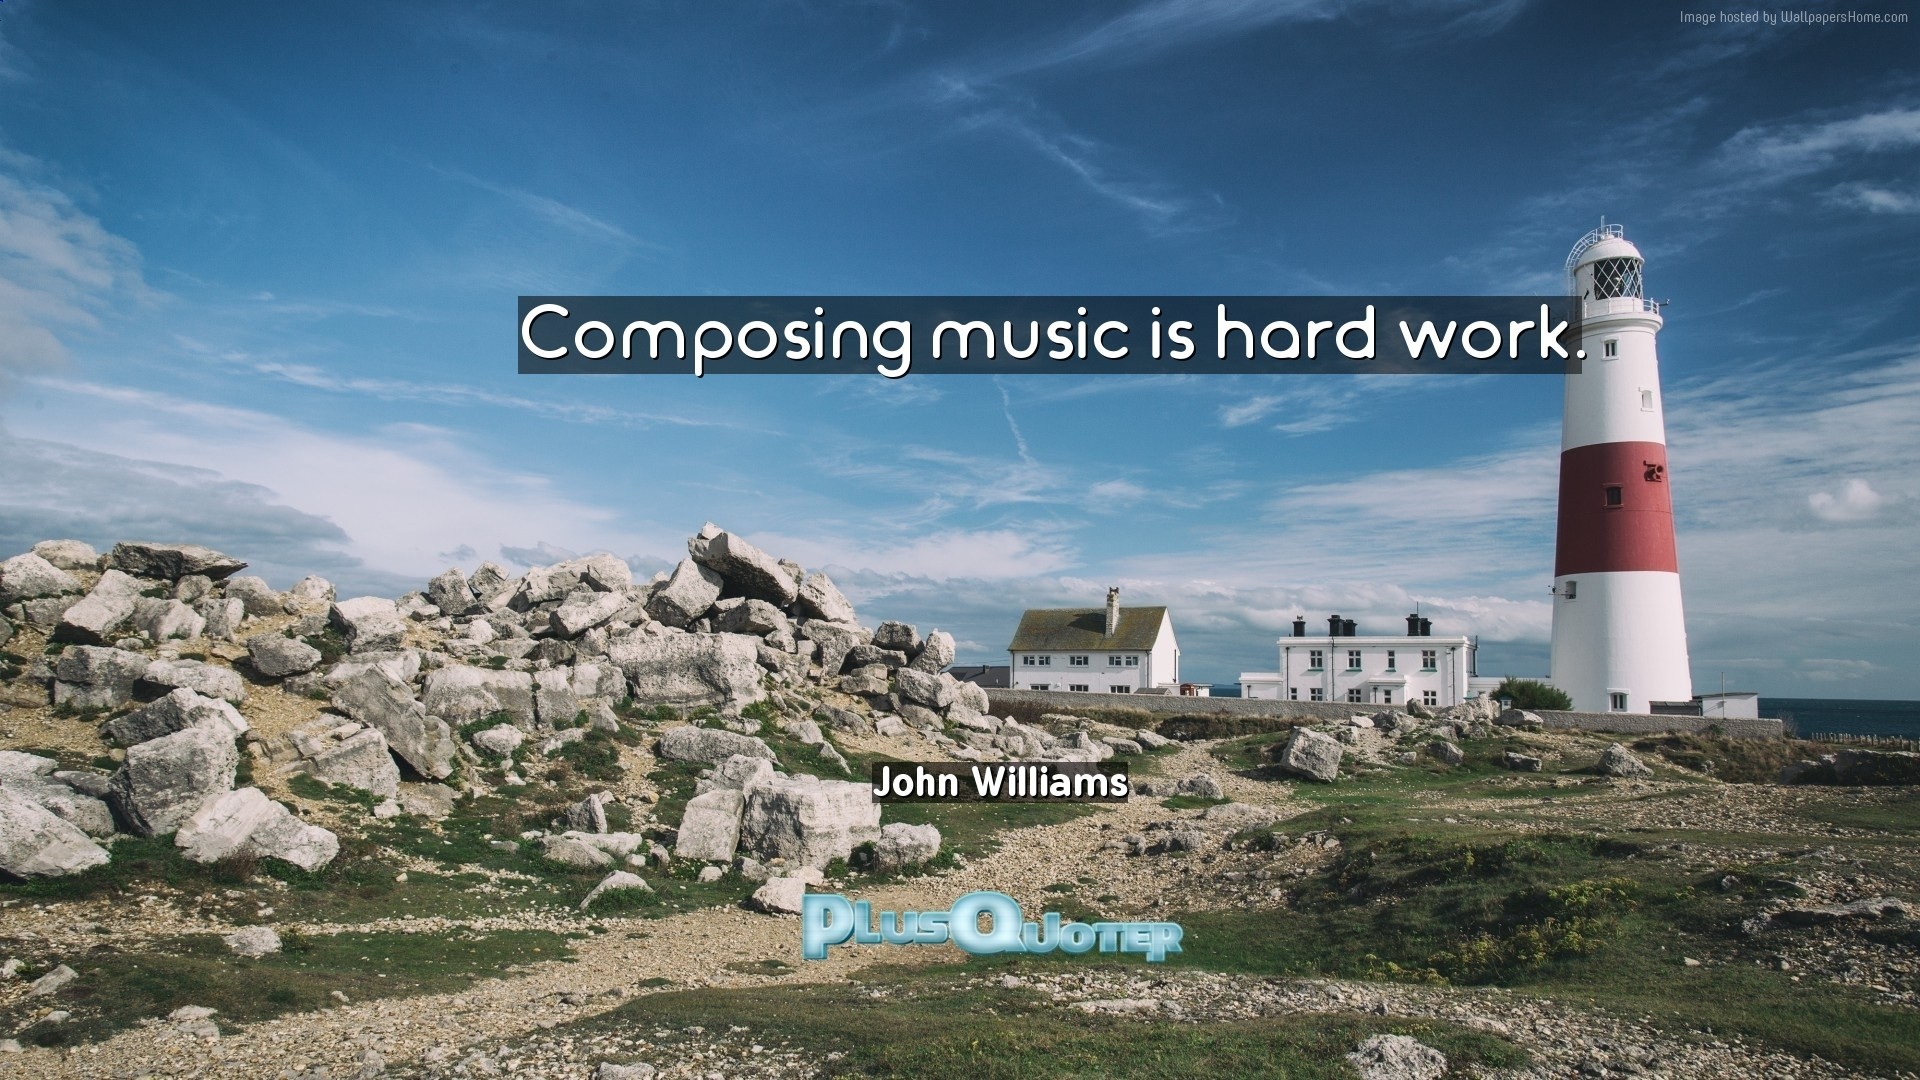 1920x1080 Download Wallpaper with inspirational Quotes- "Composing music is hard work."-  John